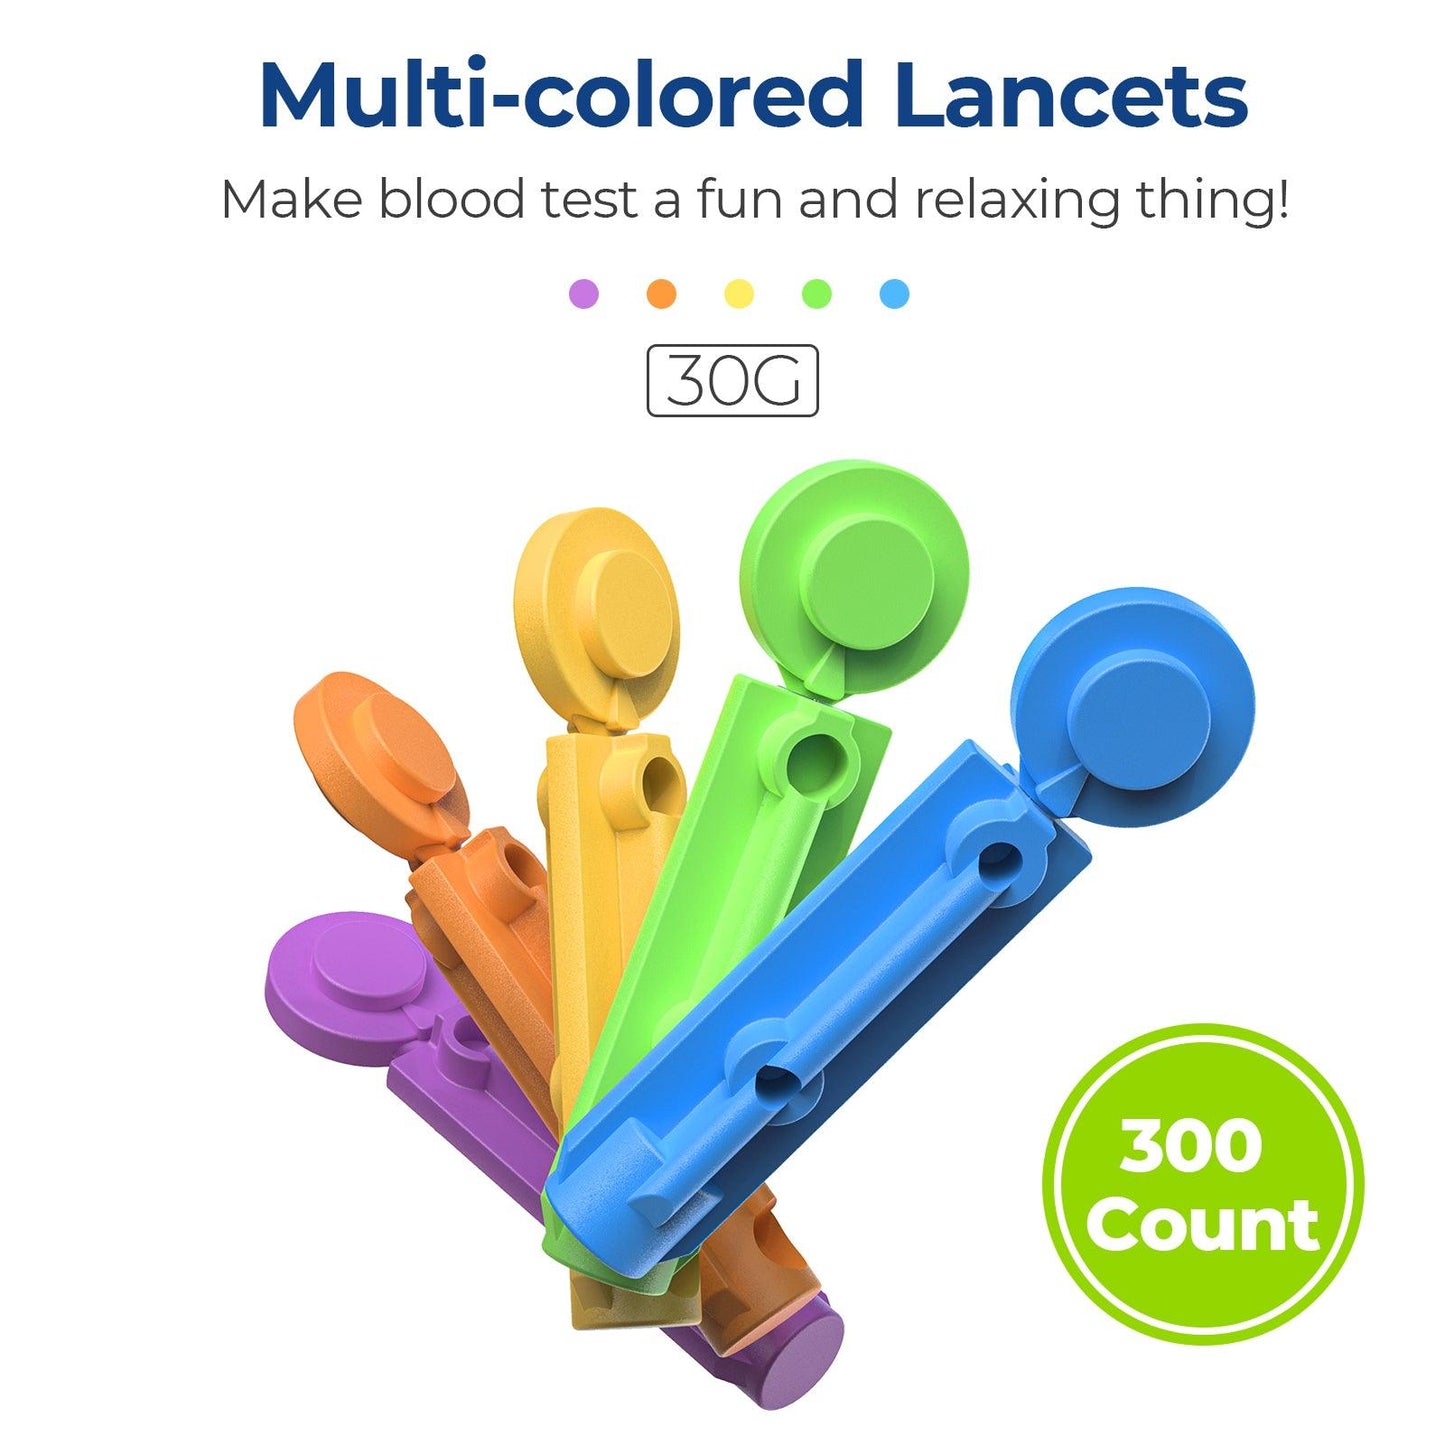 AUVON Lancets for Diabetes Blood Glucose Testing, Multicolored 30G 300 Count Diabetic Lancets for Less Pain, Universal Sterile Needles Fit Most Lancing Devices, Disposable Blood Sugar Lancets - AUVON